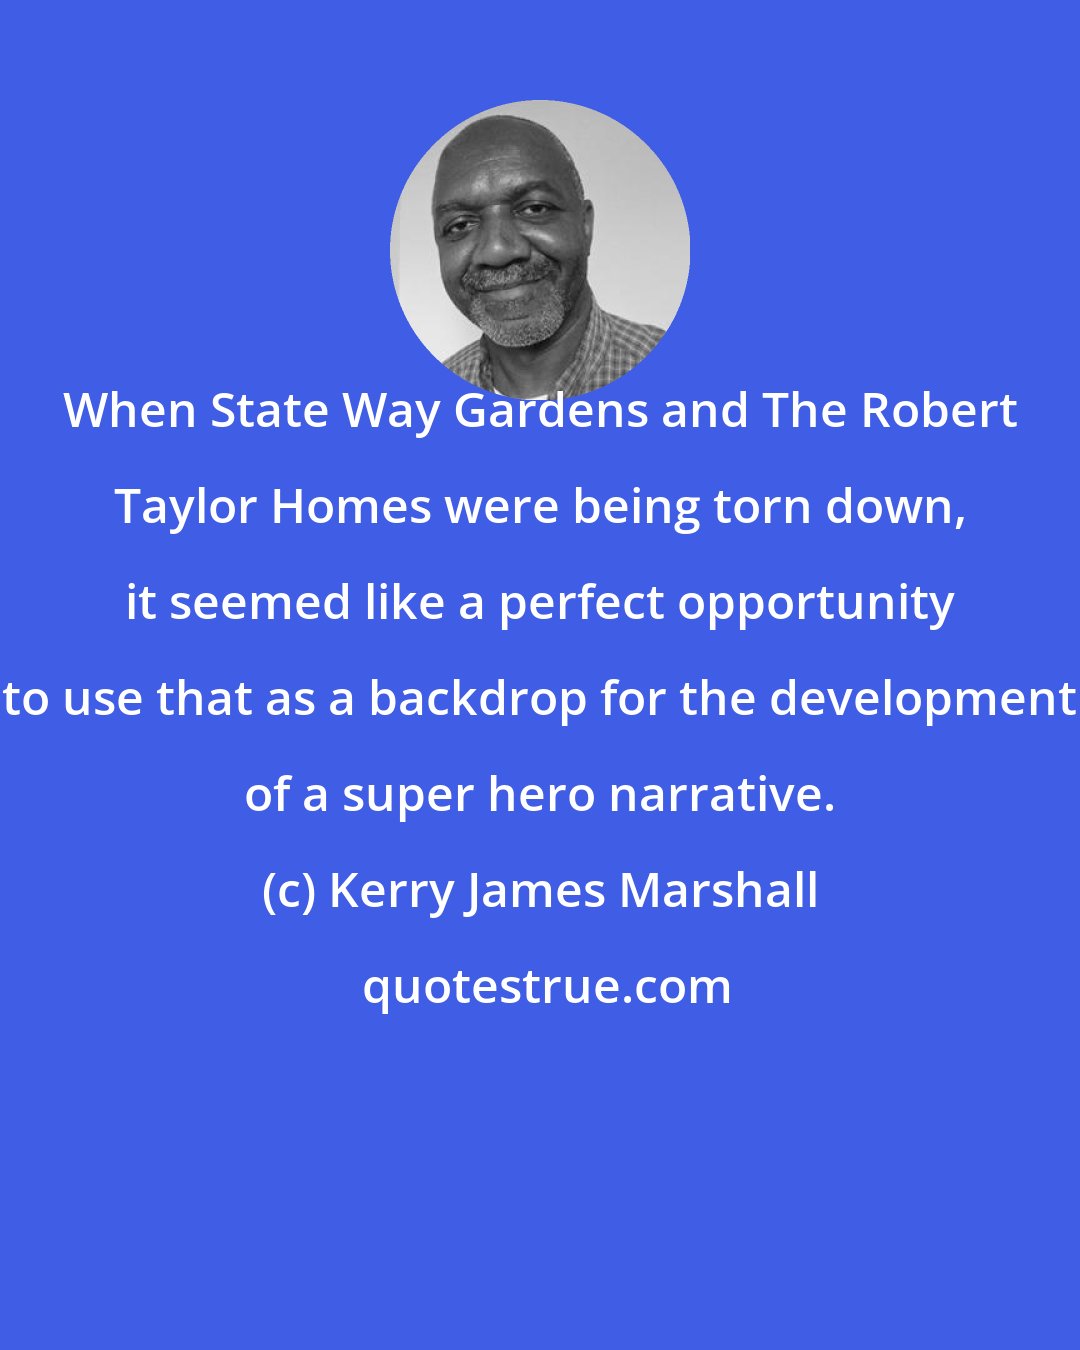 Kerry James Marshall: When State Way Gardens and The Robert Taylor Homes were being torn down, it seemed like a perfect opportunity to use that as a backdrop for the development of a super hero narrative.